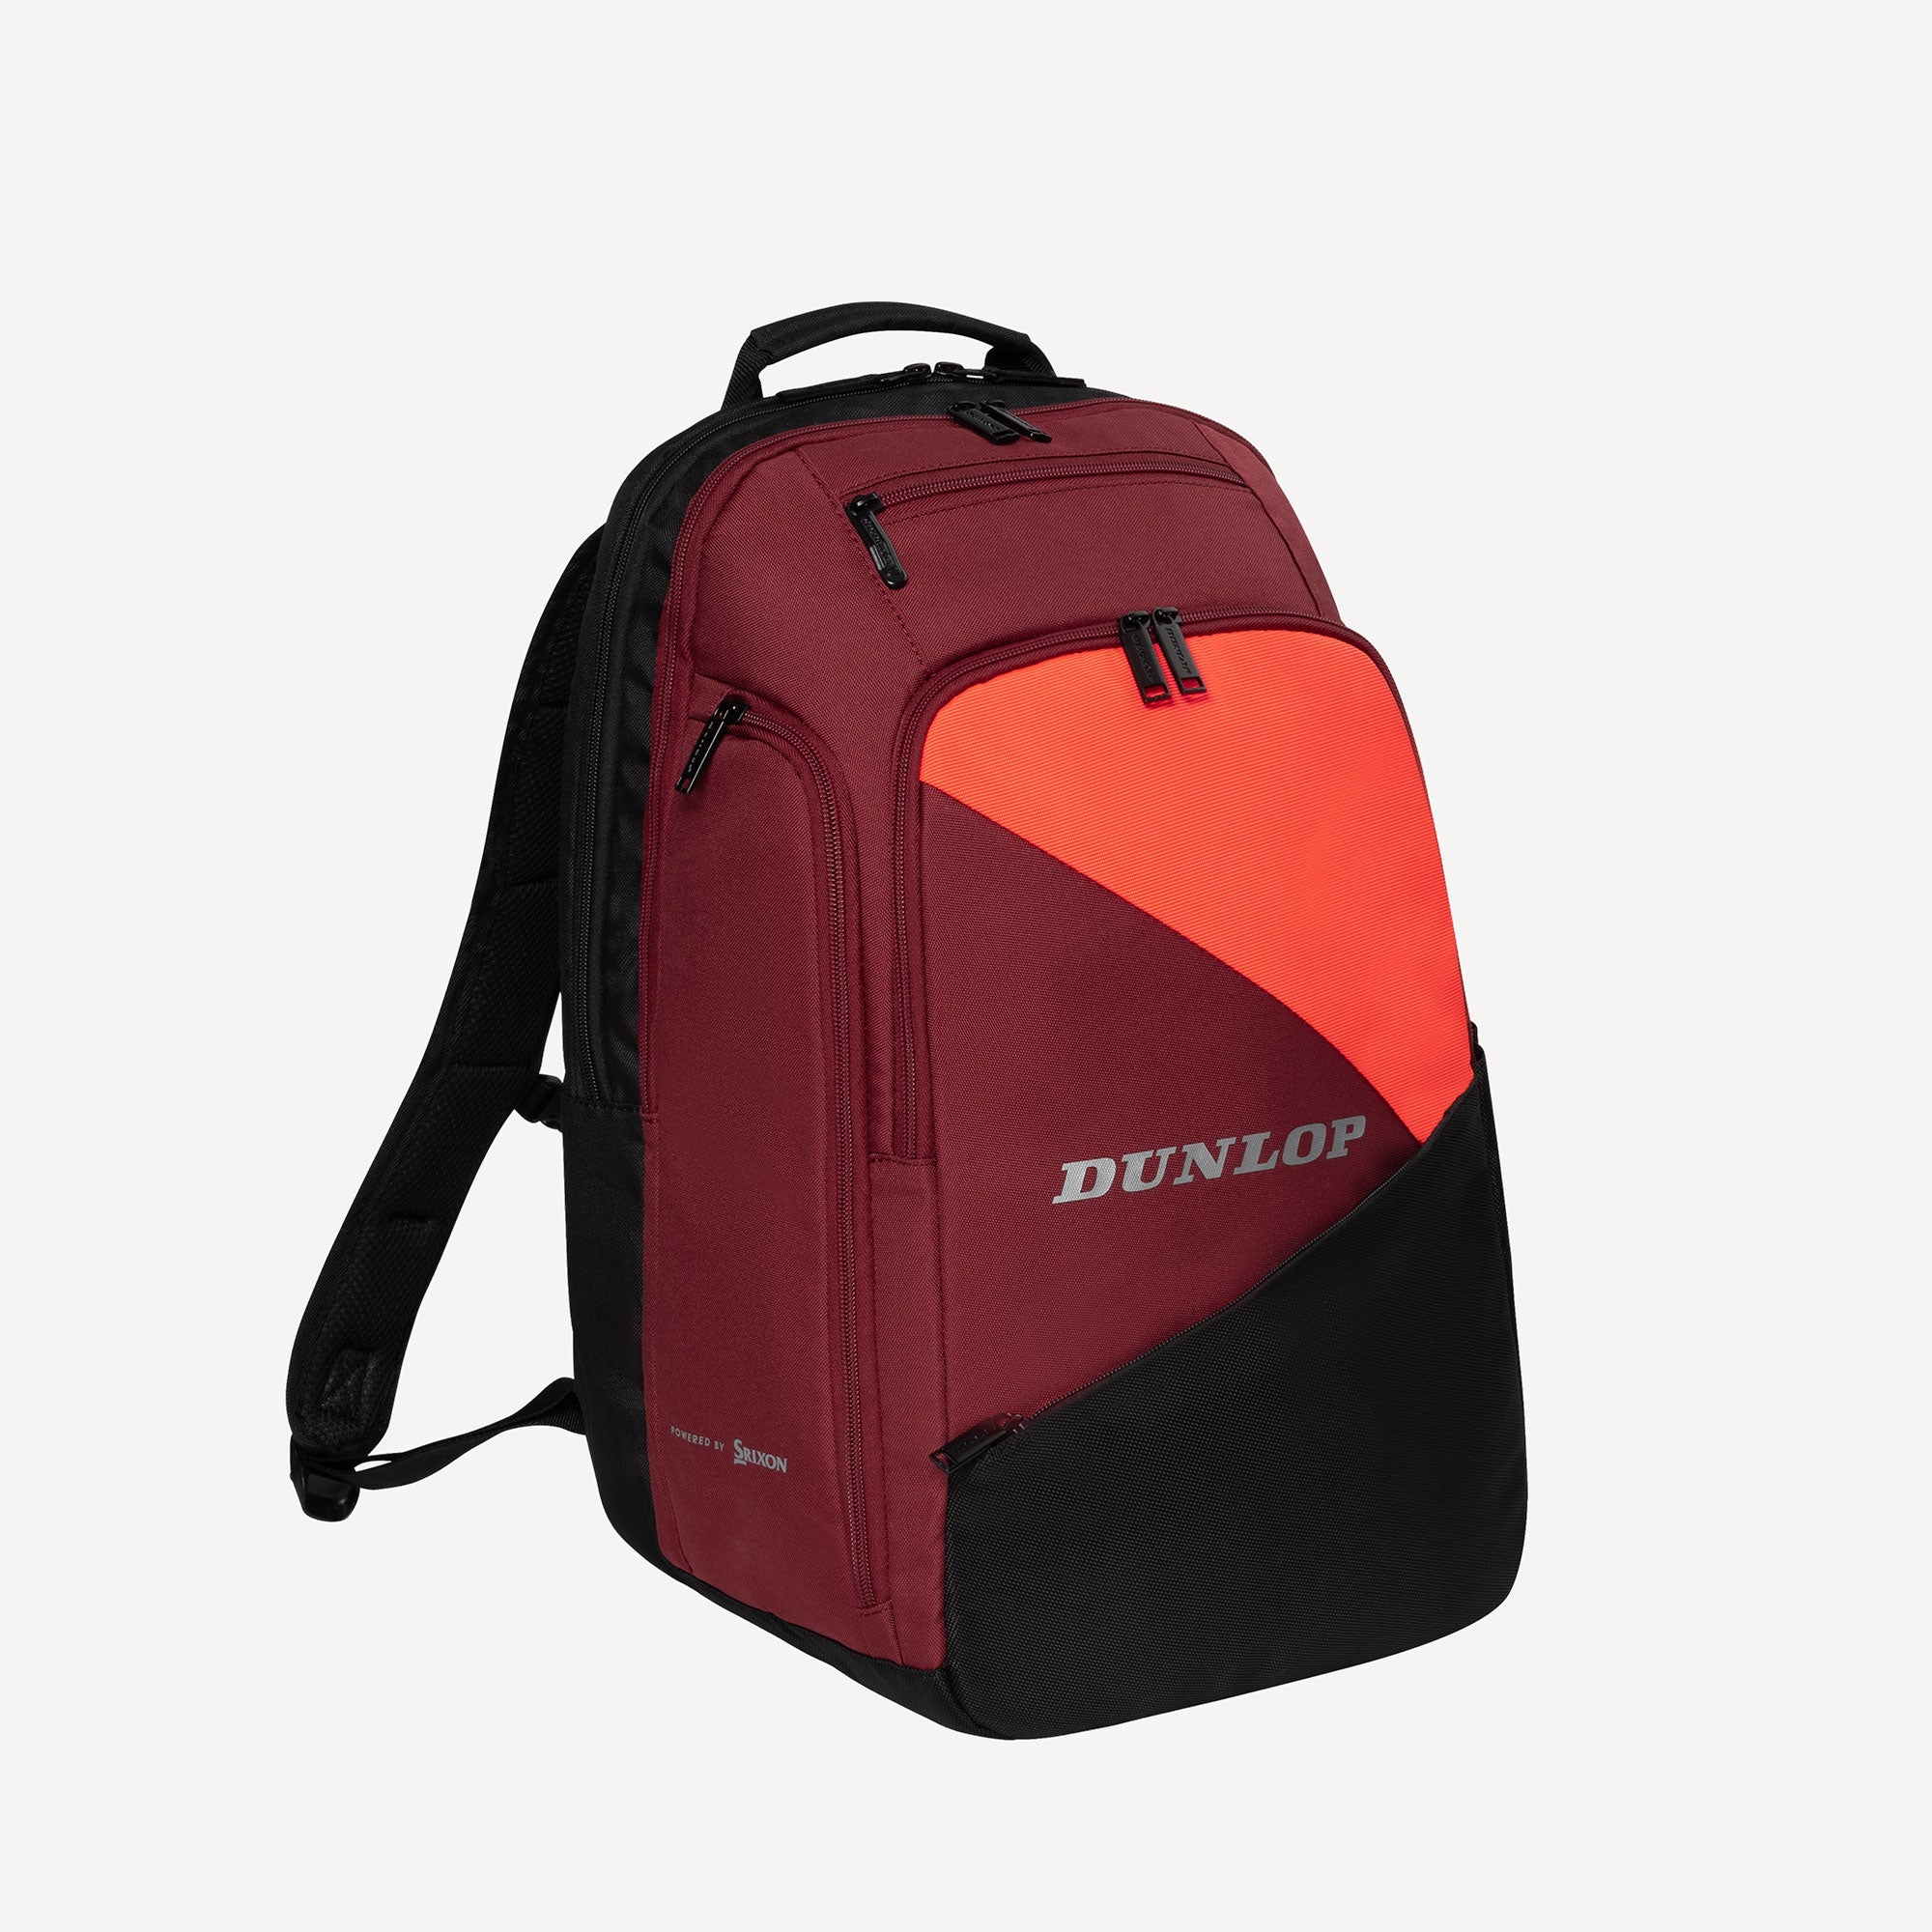 Dunlop CX Performance Tennis Backpack - Red (1)